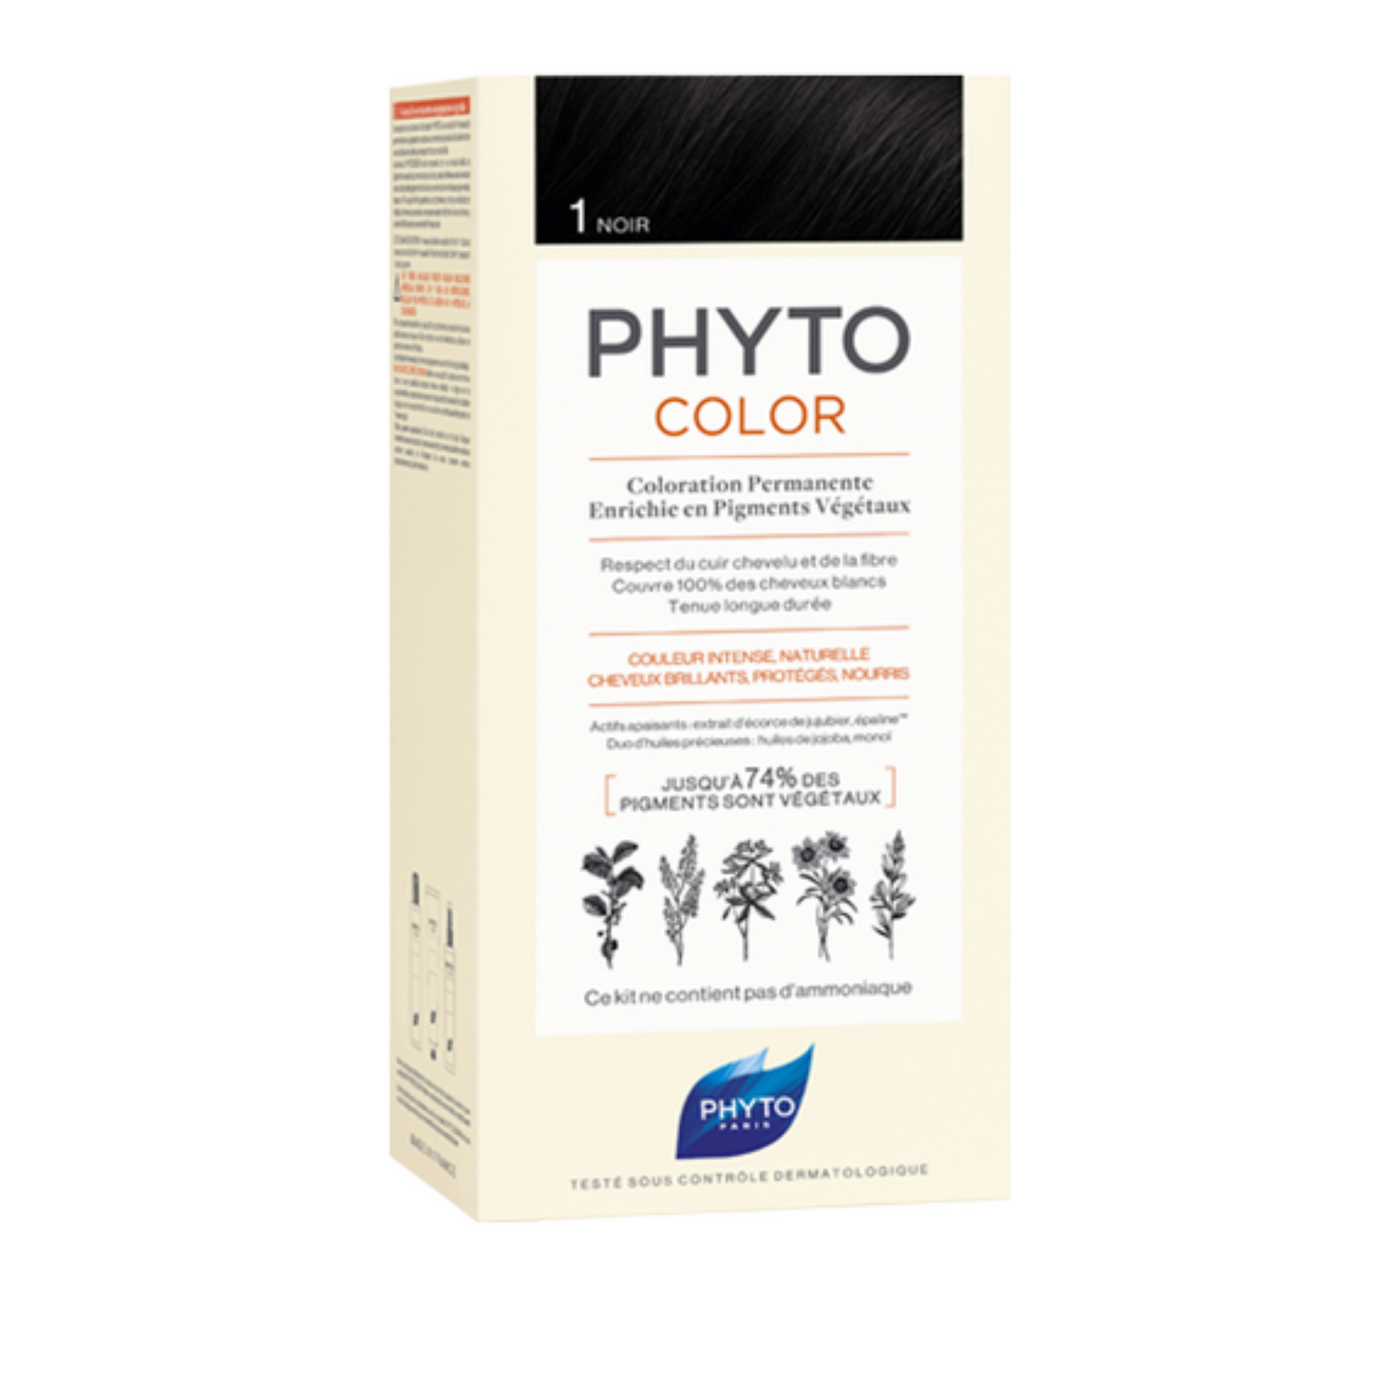 PHYTO - PHYTOCOLOR 1 NOIR